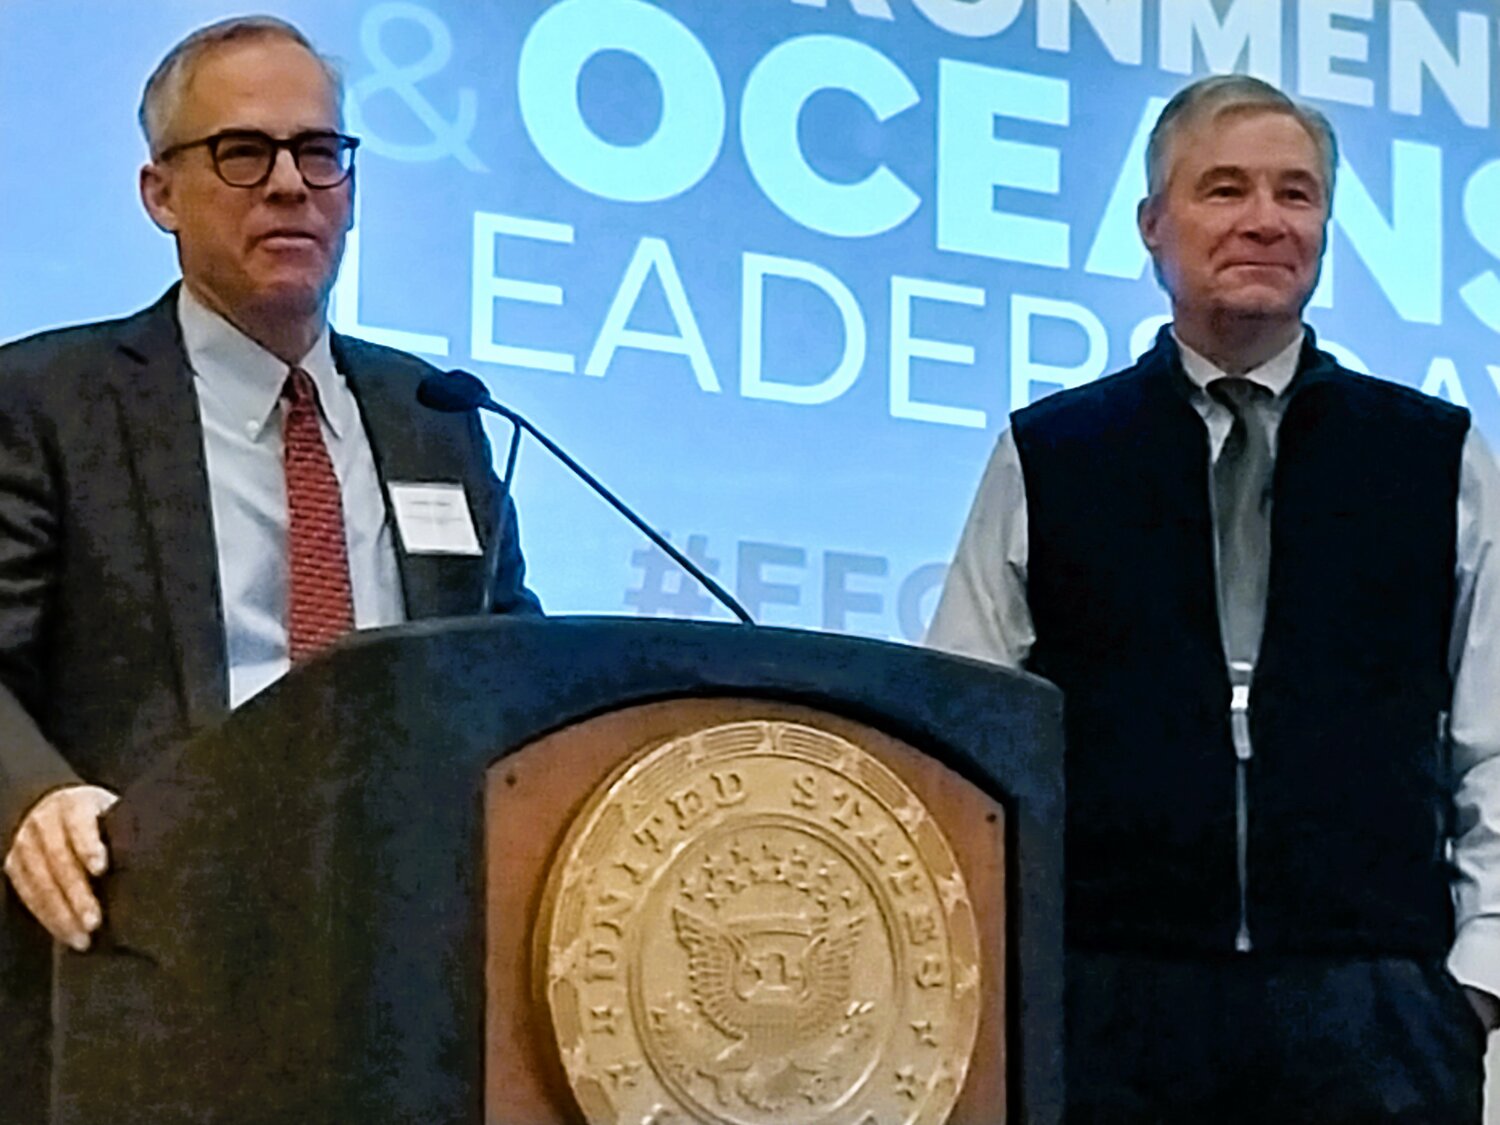 Jonathan Stone, former executive director of Save the Bay, was presented this year’s person of the year award  by Sen. Sheldon Whitehouse at the 14th Annual Energy, Environment and Oceans Leaders Day.